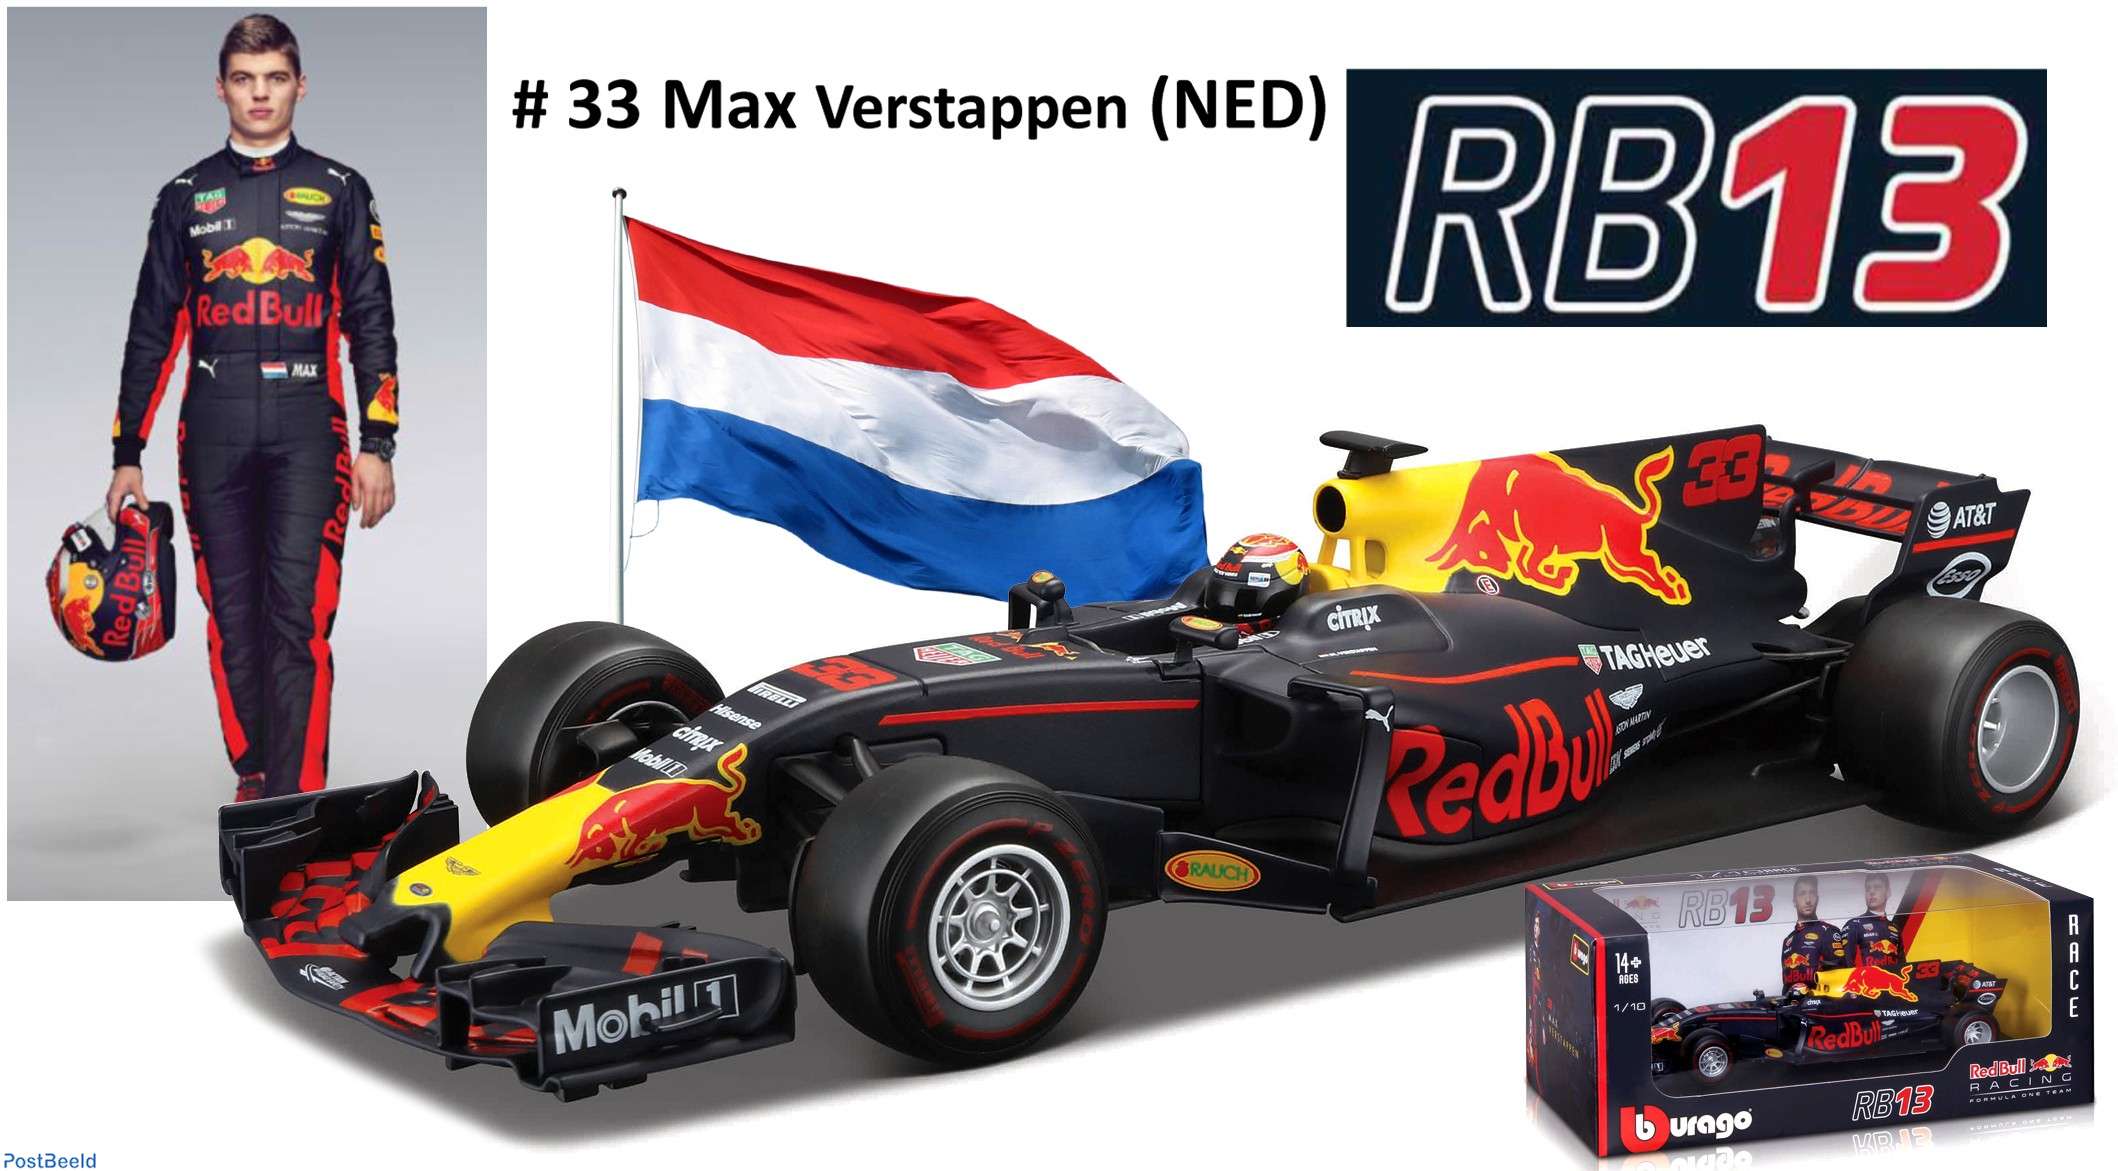 RED BULL RB13 TAG HEUER #33 MAX 2017 - Collecting Stamps - PostBeeld - Online Stamp Shop - Collecting